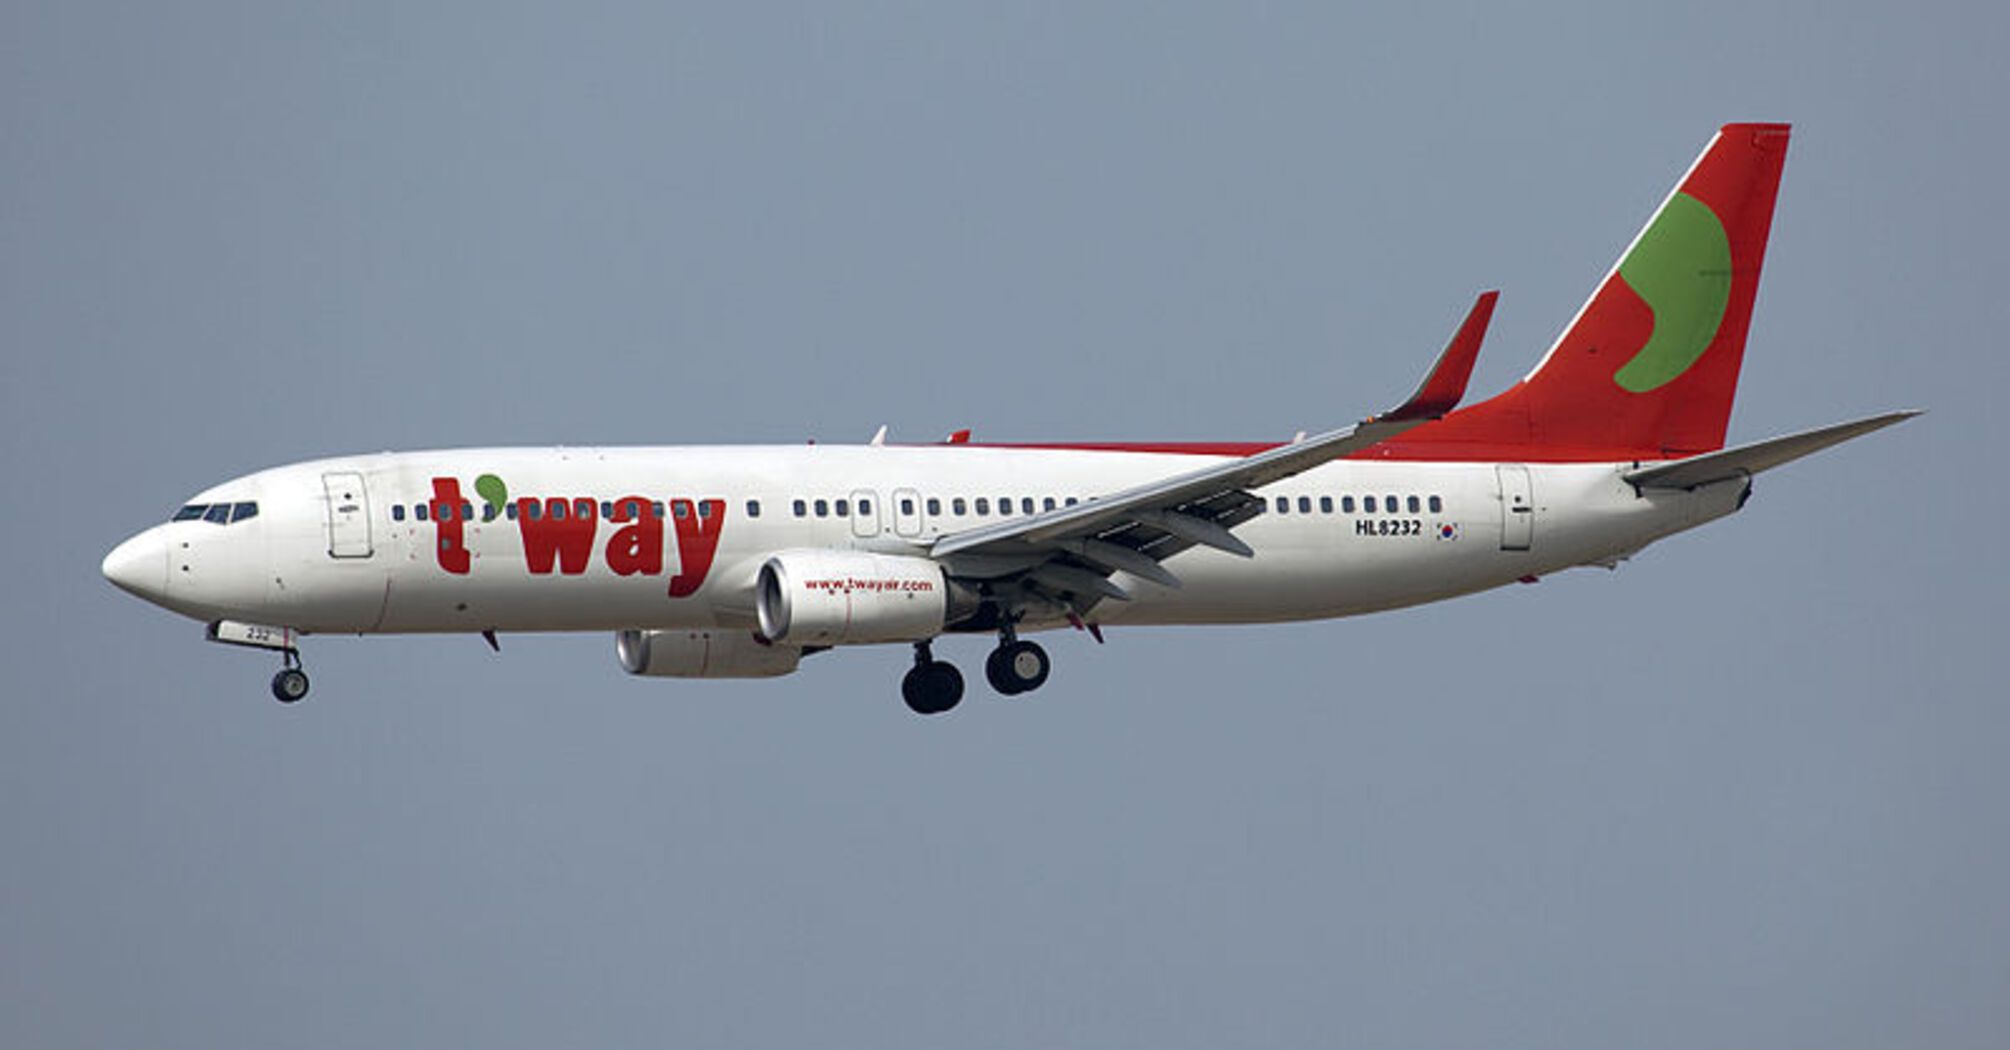 T'way Air Compensation for Delayed or Cancelled Flights